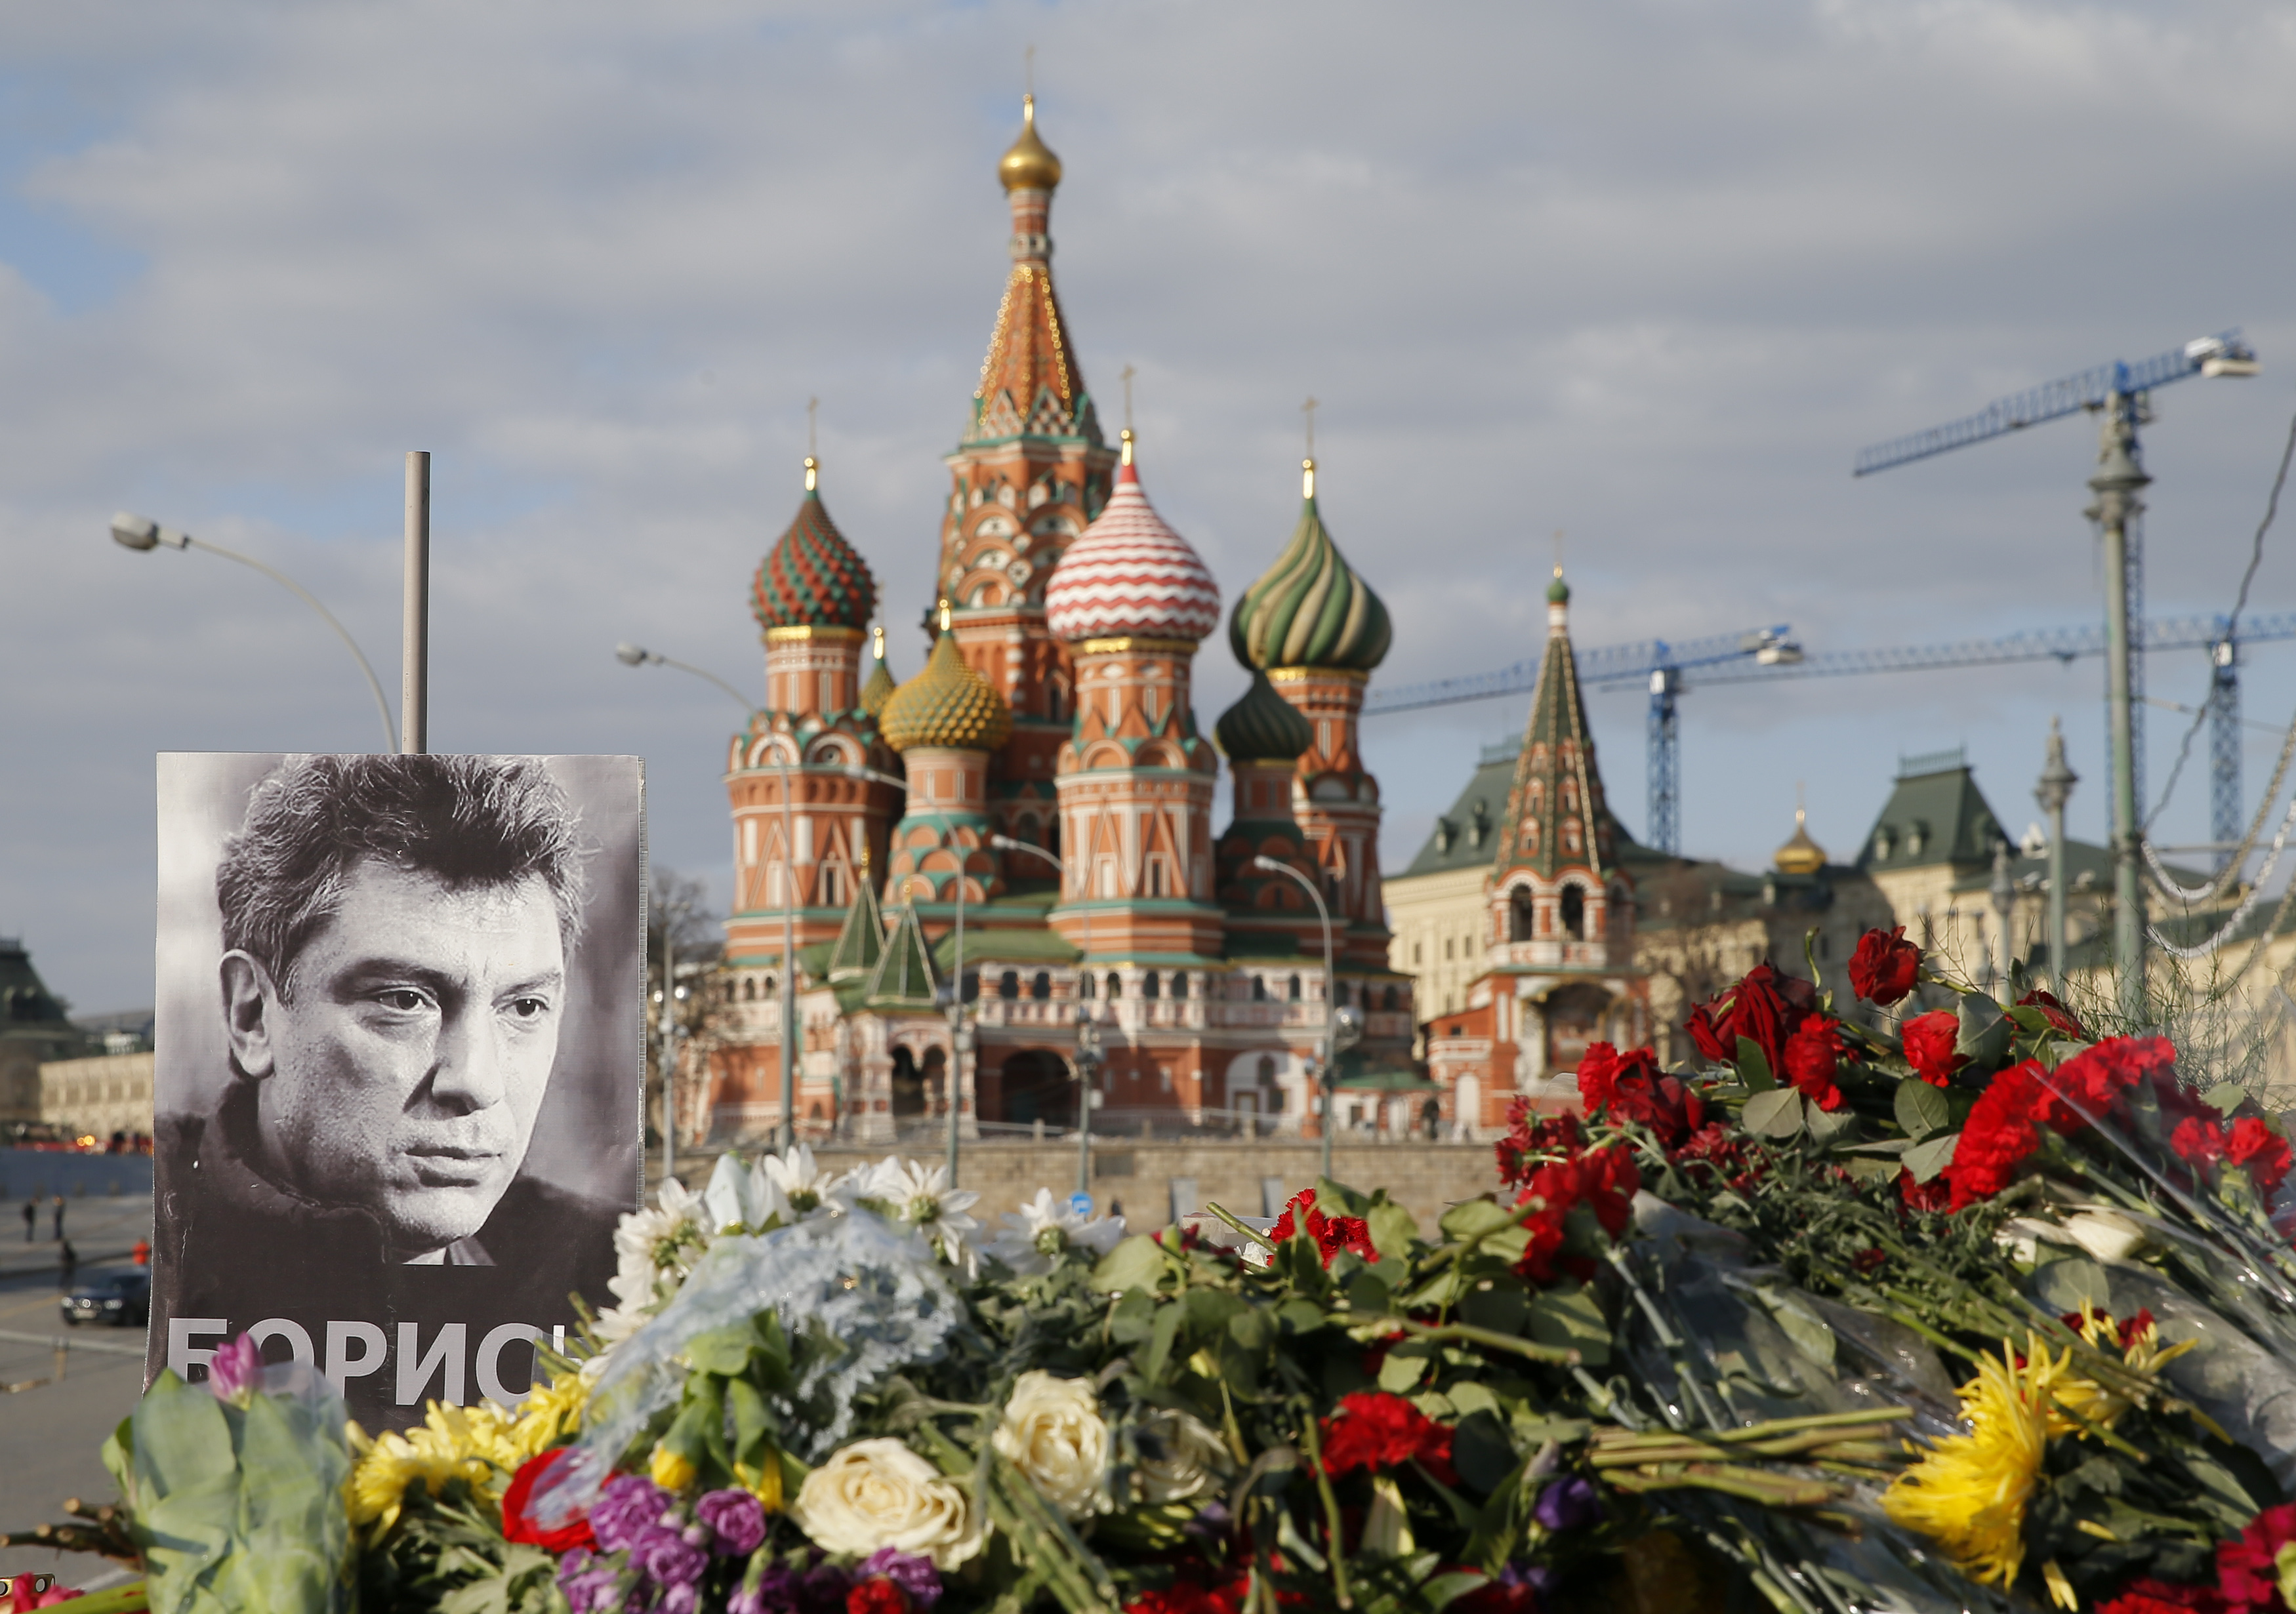 A portrait of Kremlin critic Boris Nemtsov and flowers are pictured at the site where he was killed on Feb. 27, 2015 with St. Basil's Cathedral seen in the background, at the Great Moskvoretsky Bridge in central Moscow on March 6, 2015. (Maxim Shemetov—Reuters)